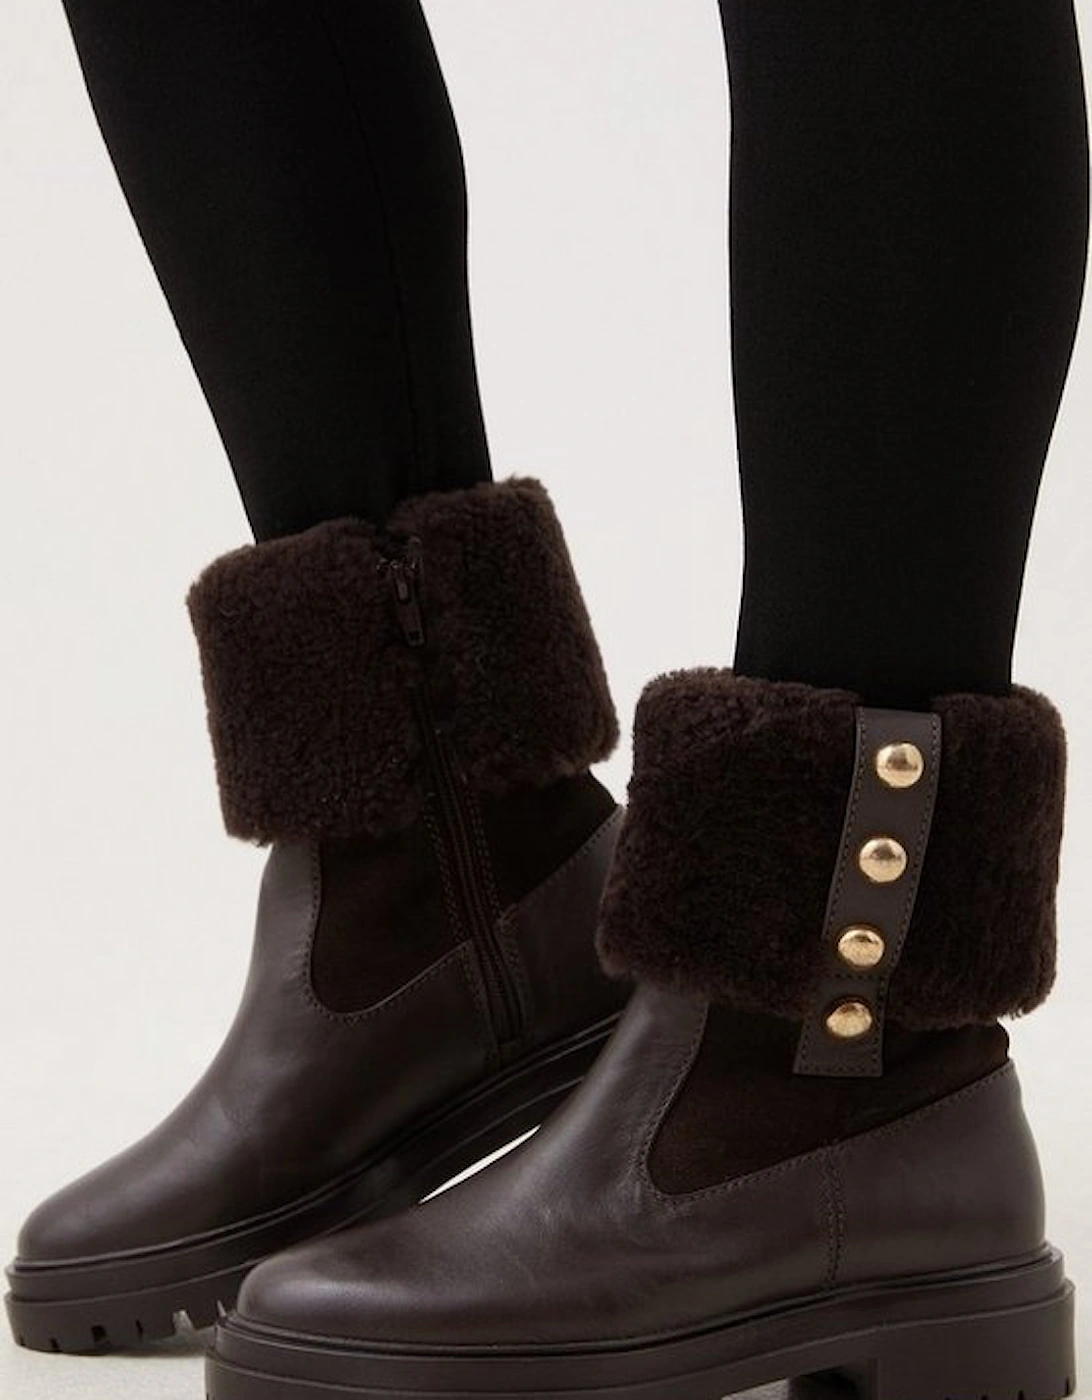 Shearling Leather Trim Detail Chelsea Boot